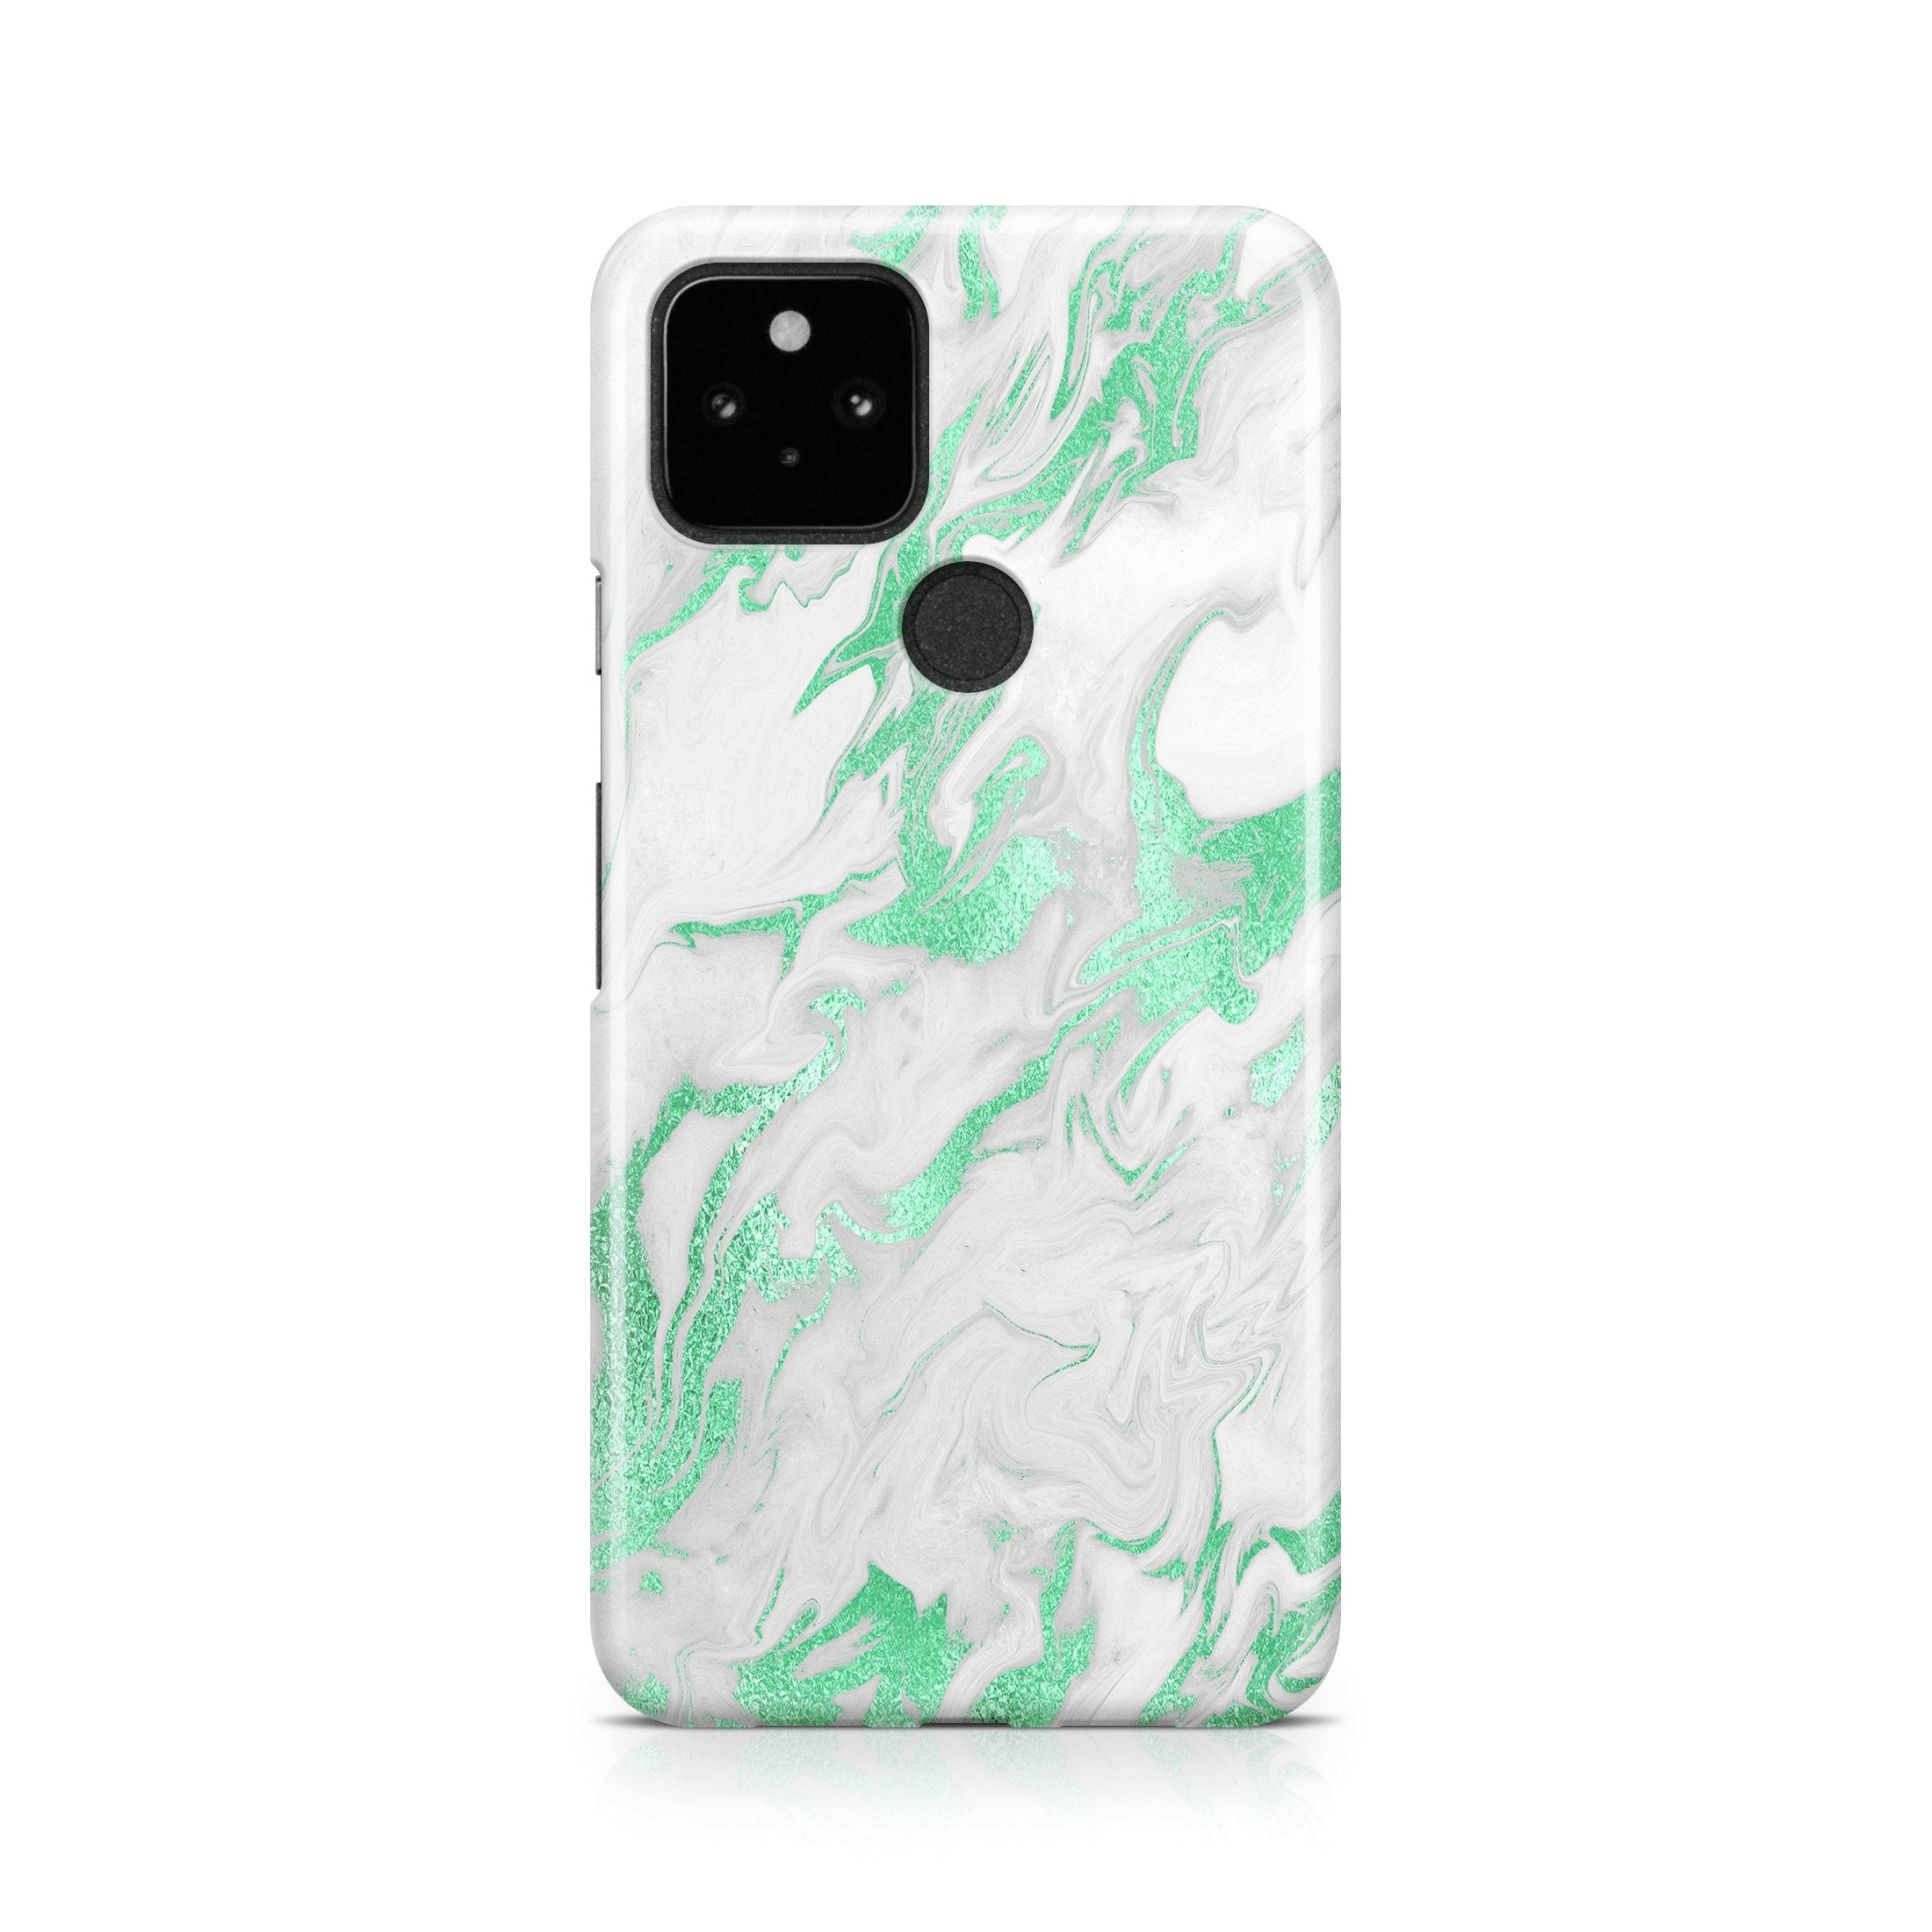 Mint White Marble - Google phone case designs by CaseSwagger